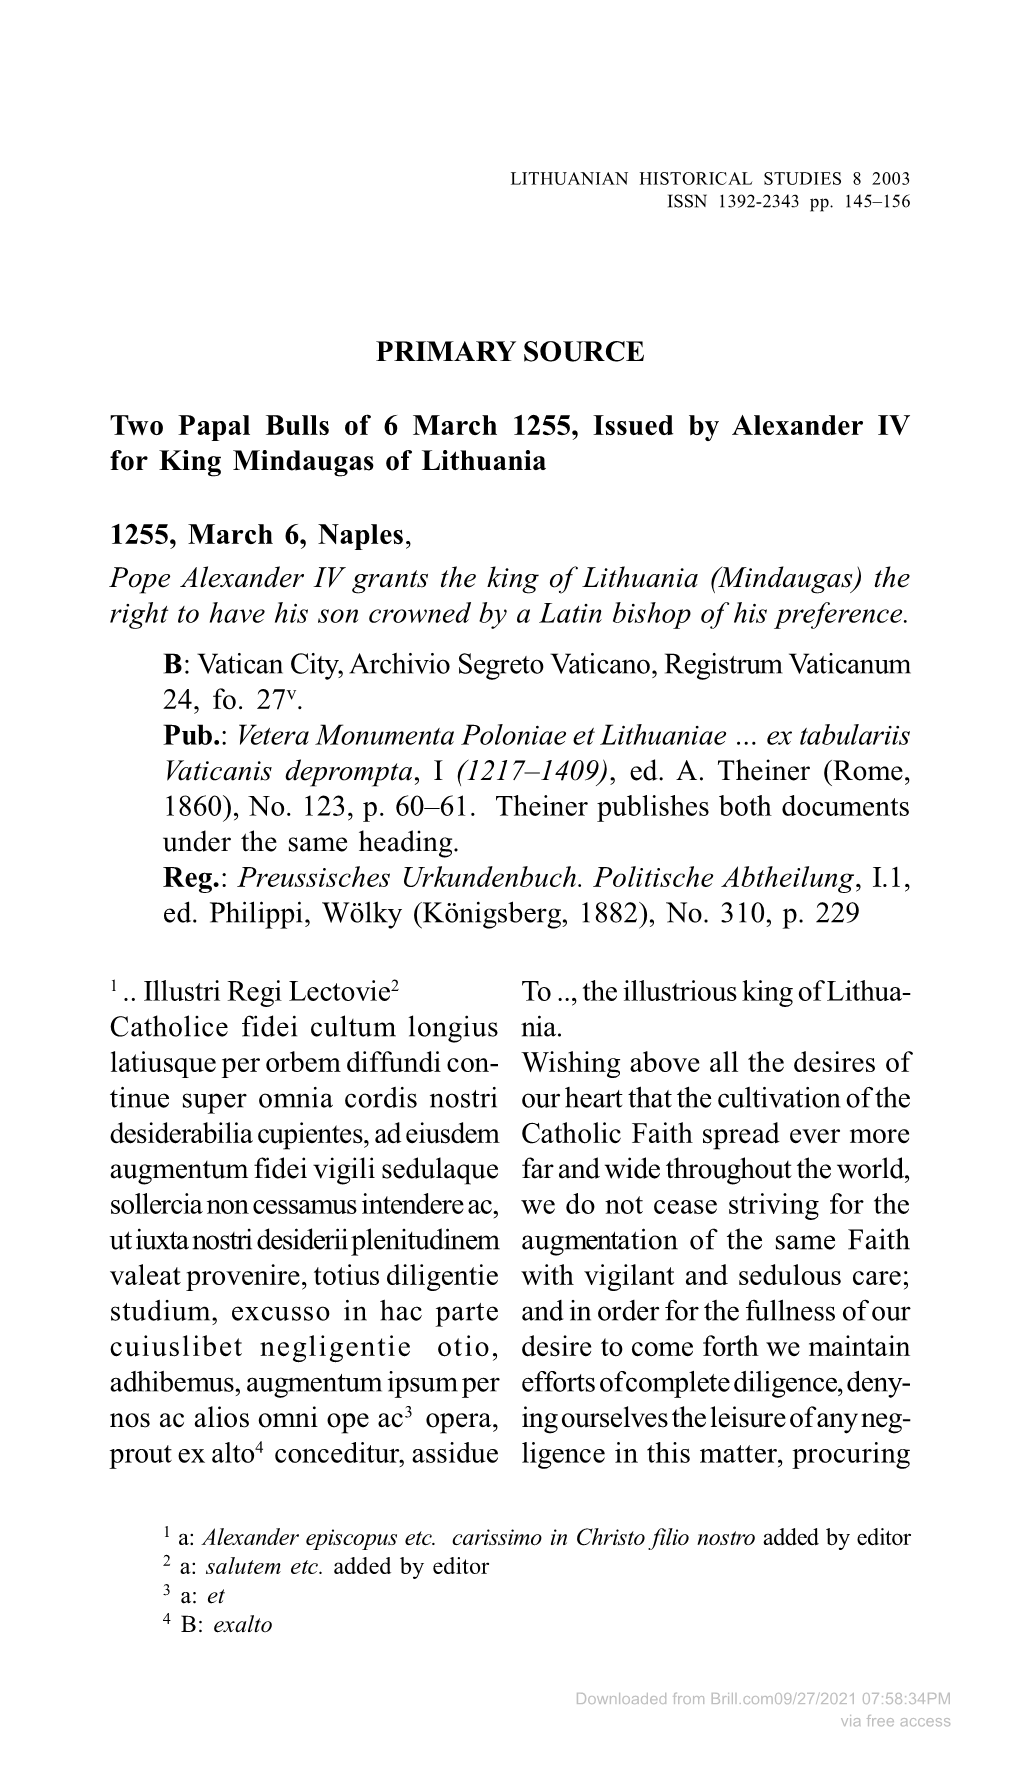 PRIMARY SOURCE Two Papal Bulls of 6 March 1255, Issued By